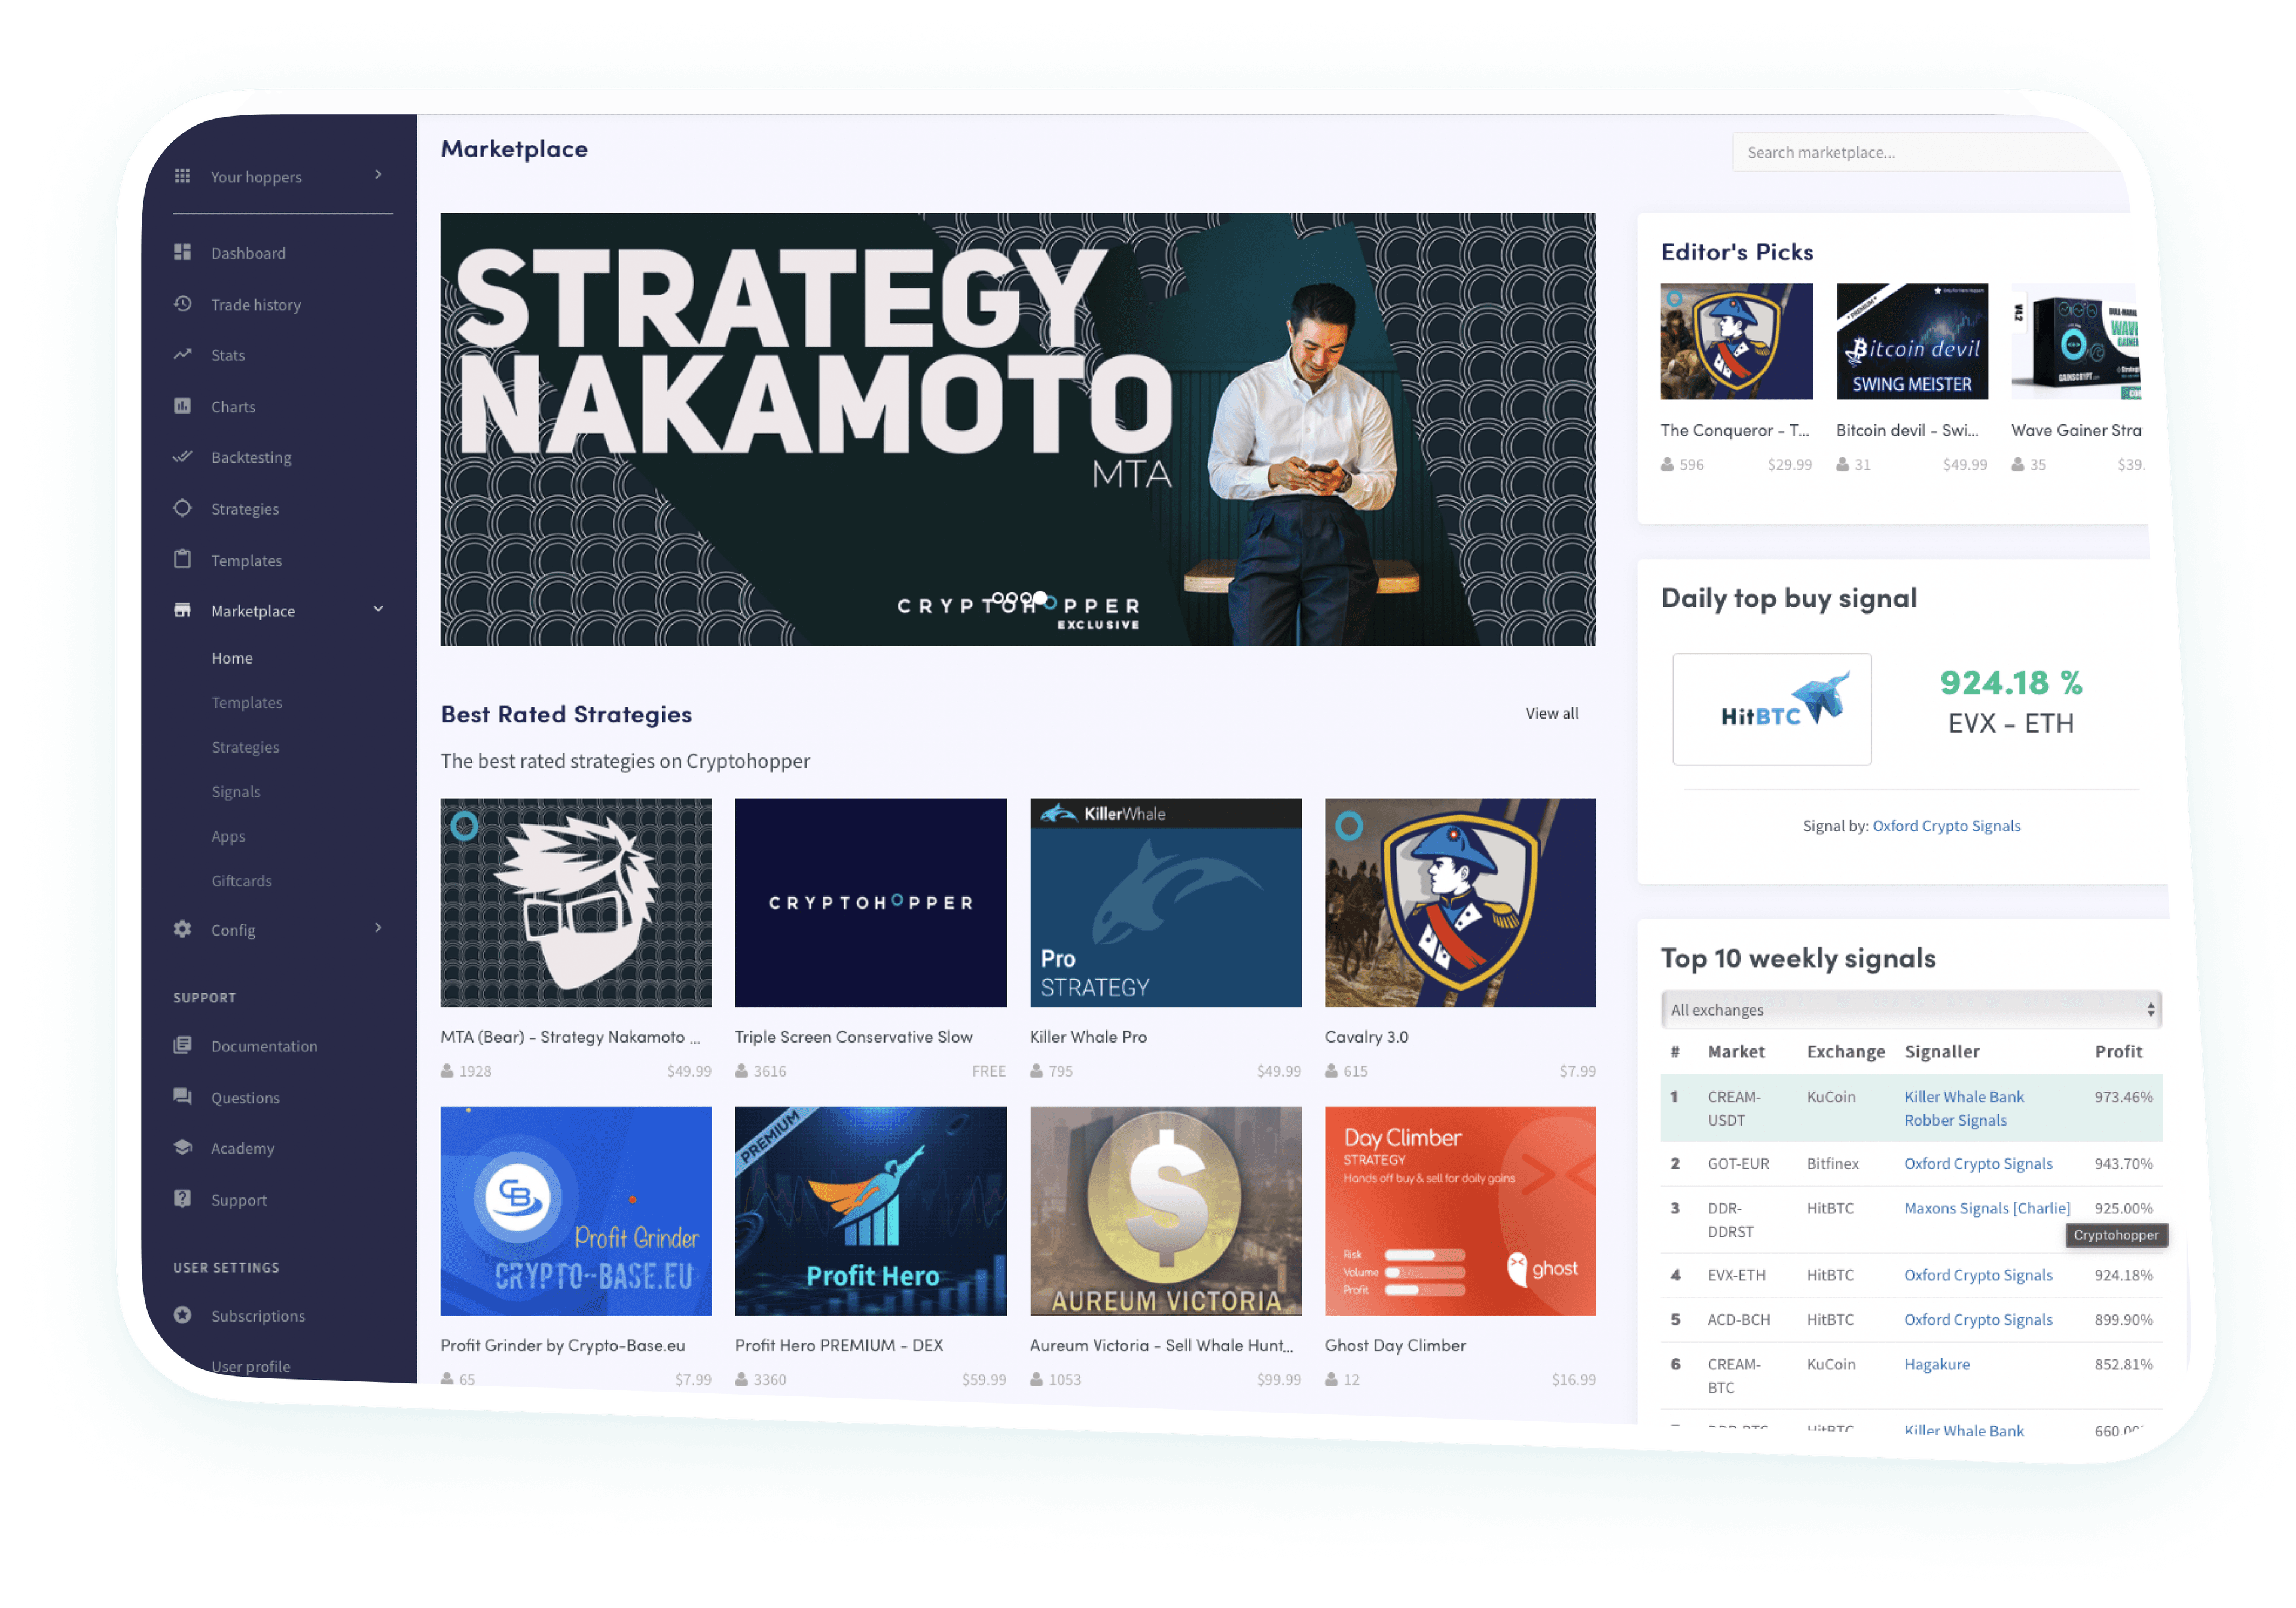 Image of the strategies for sale in the marketplace page